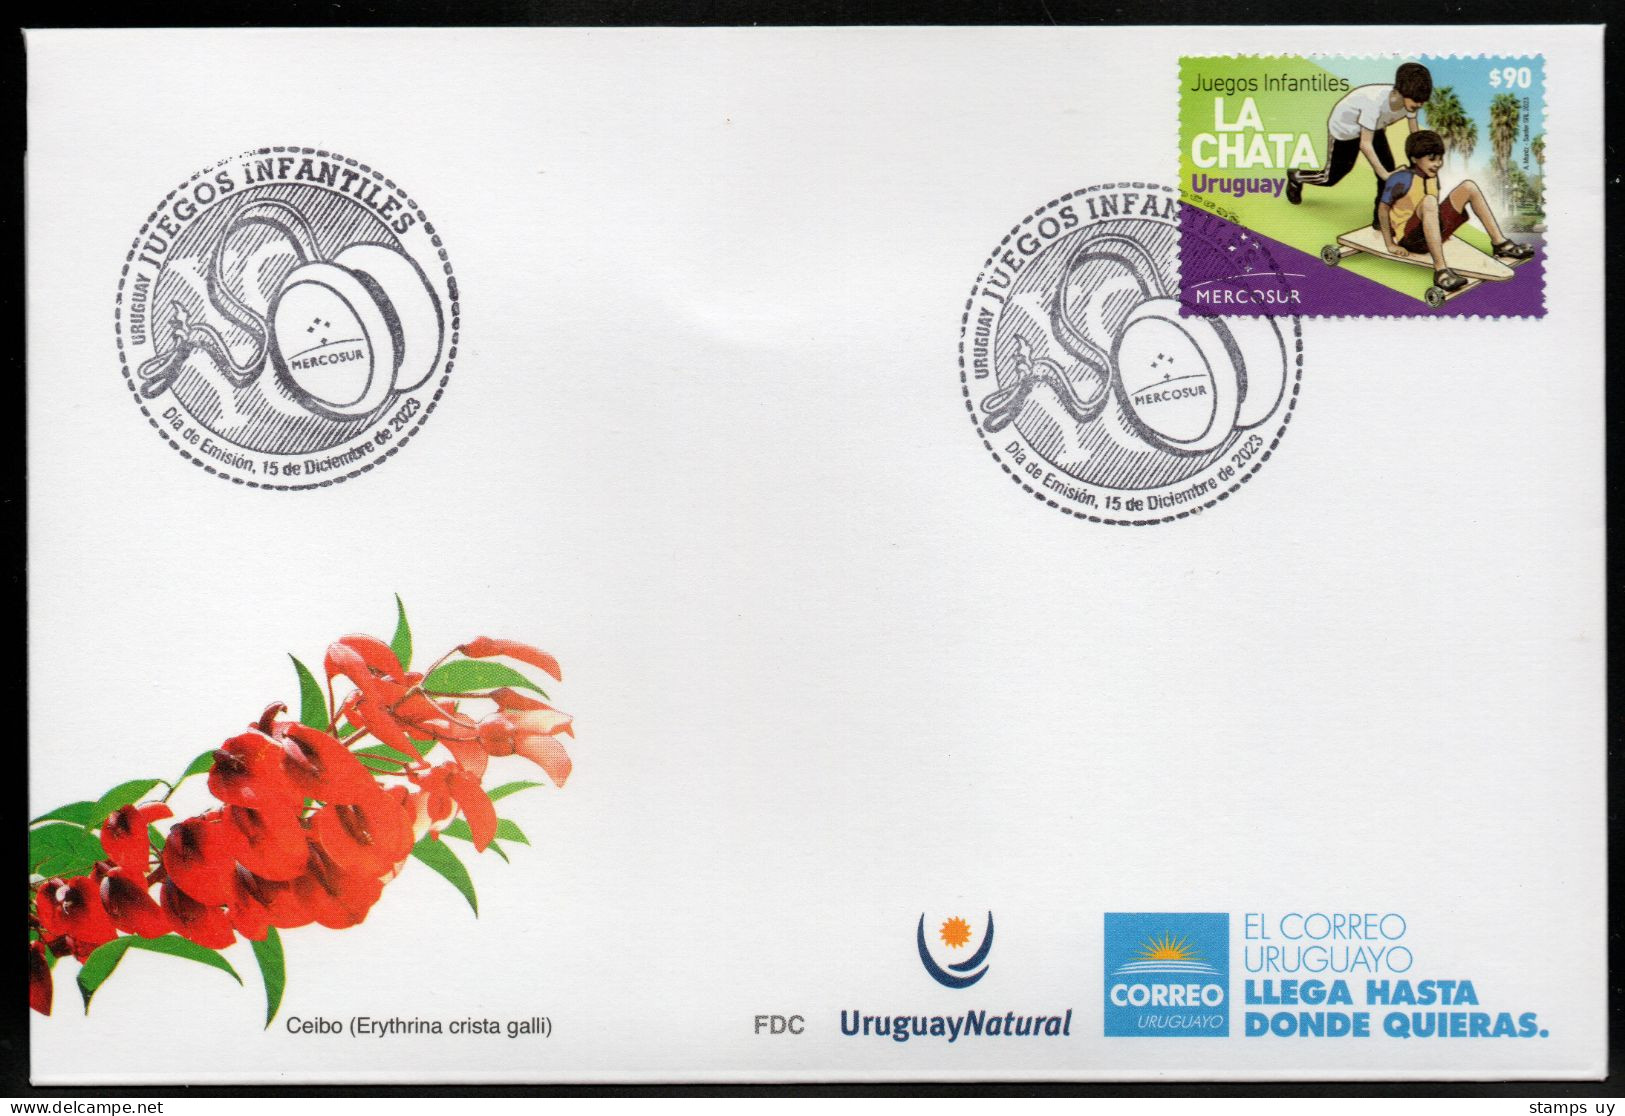 URUGUAY 2023 (Joint Issue, Mercosur, Games, Children, Toys, Wooden Cart, YoYo, Ruleman, Palm, Tree, Crux, Stars) - 1 FDC - Unclassified